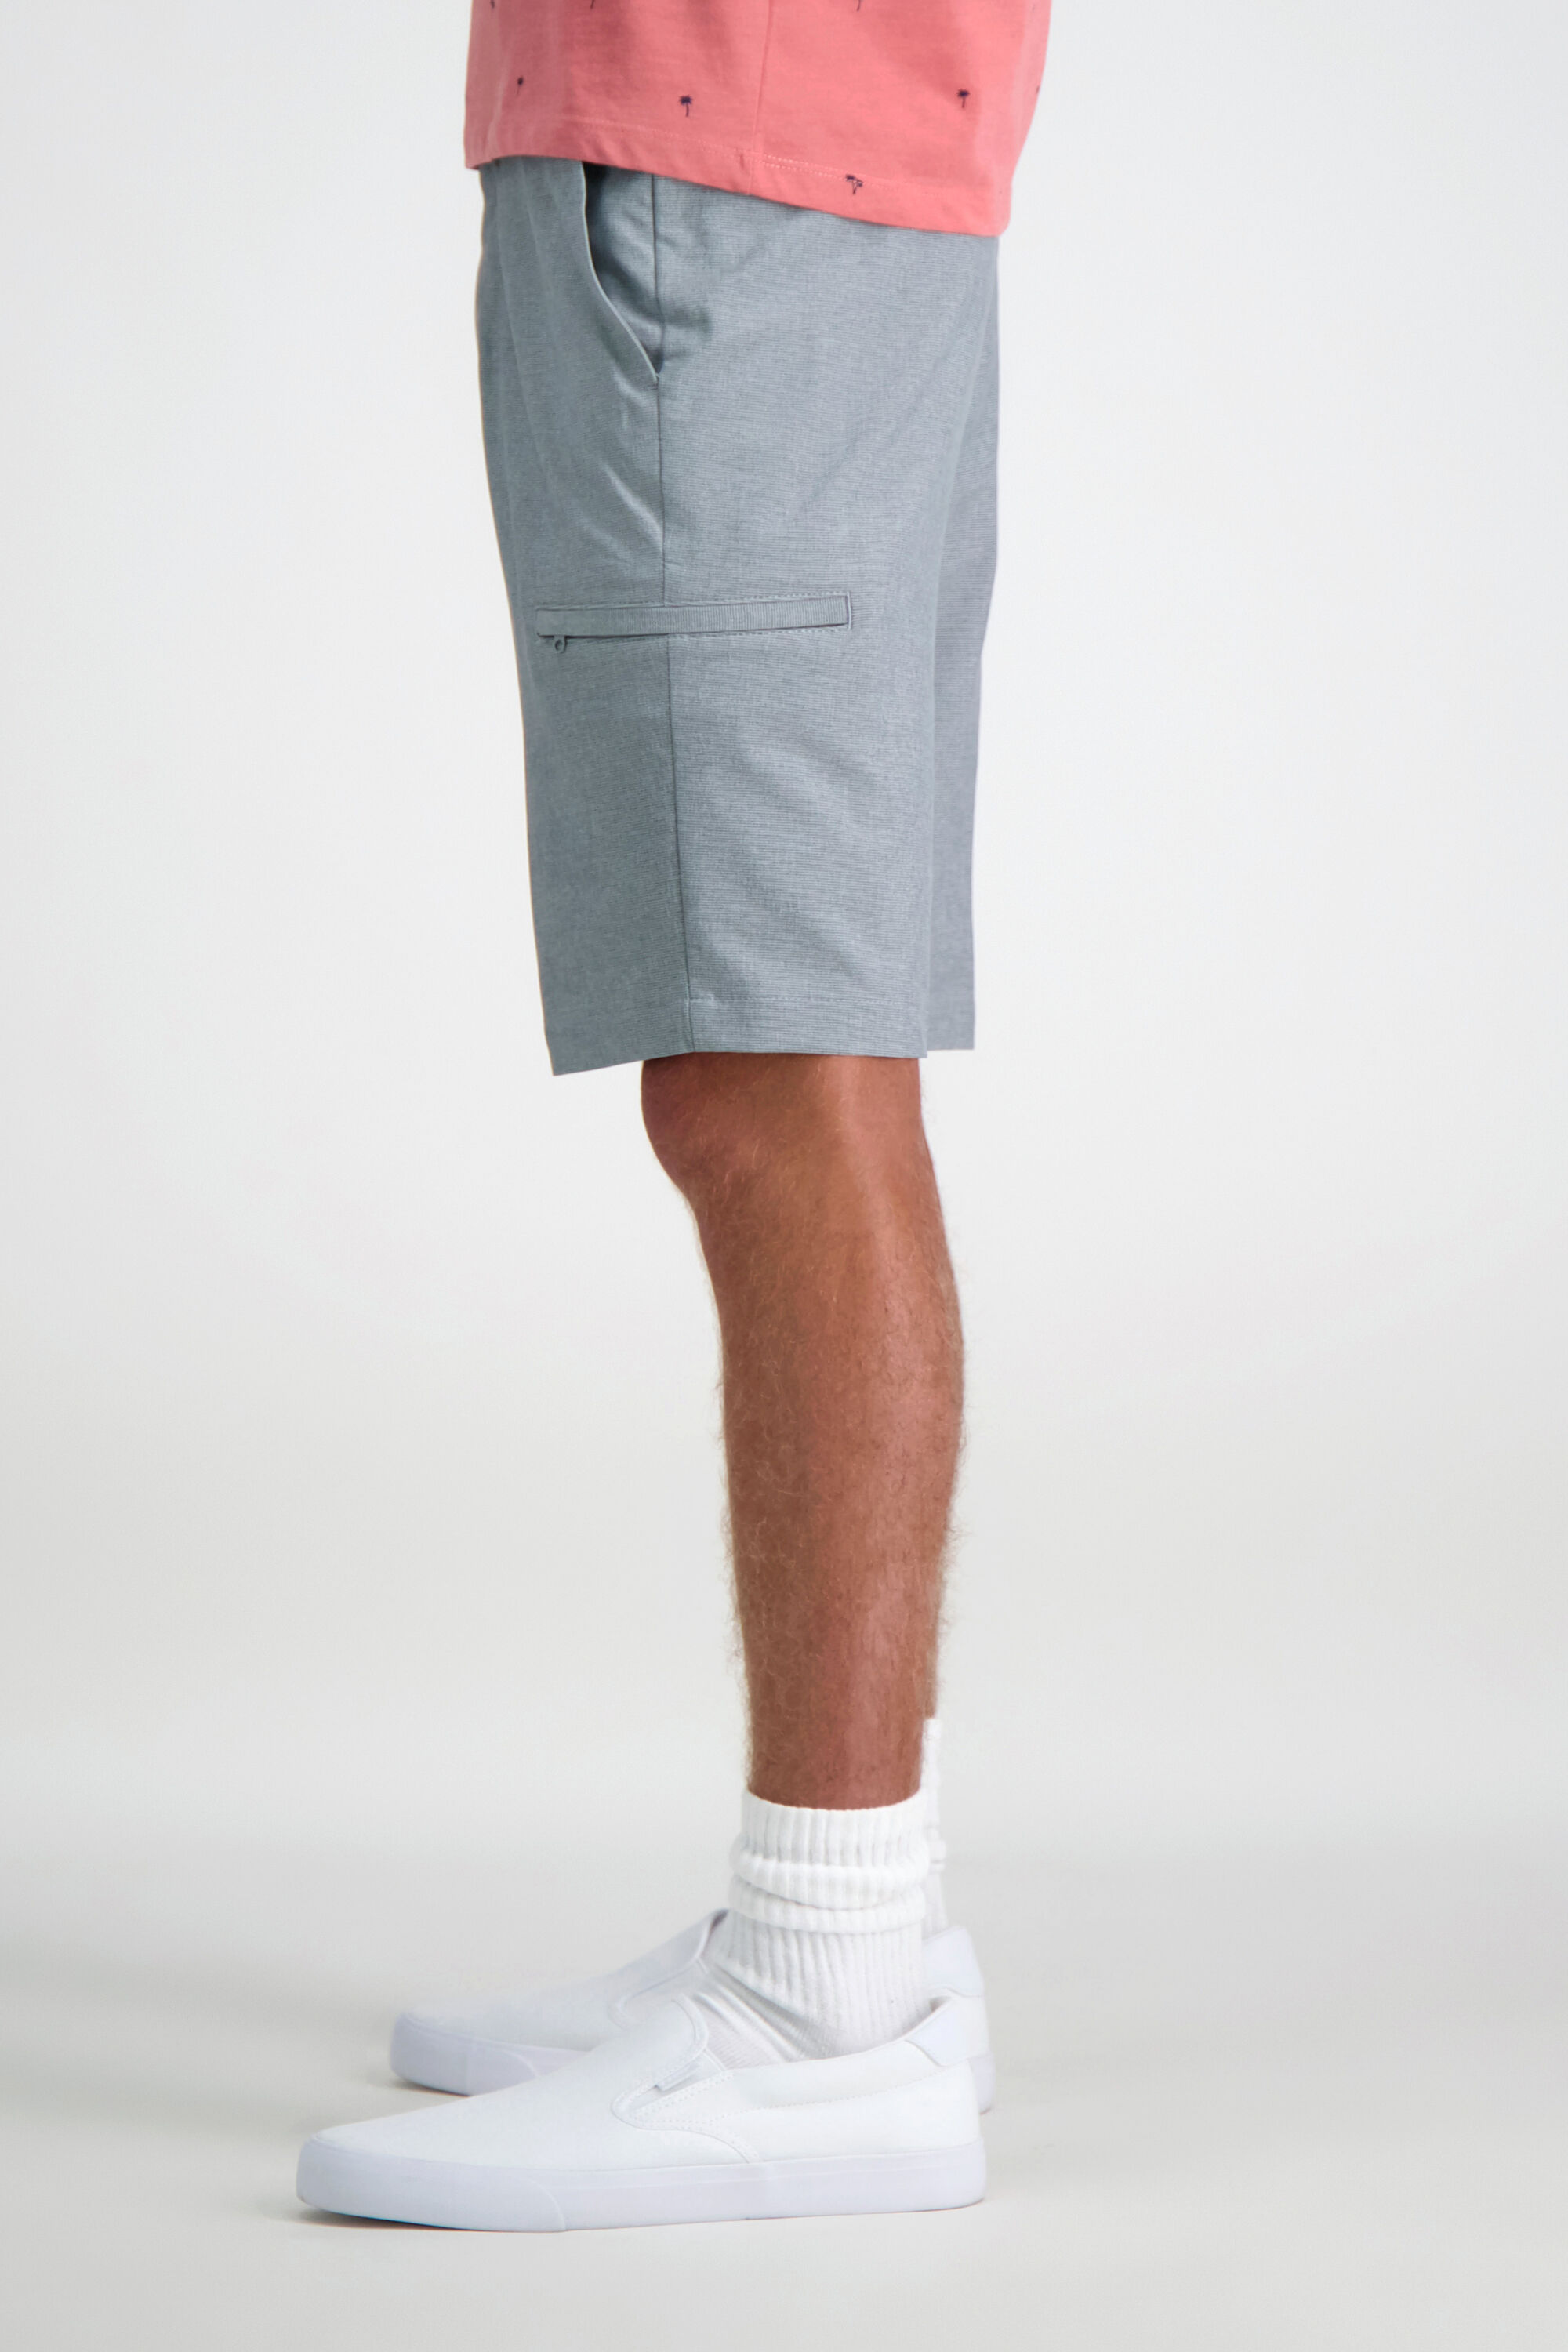 The Active Series™ Stretch Performance Utility Short